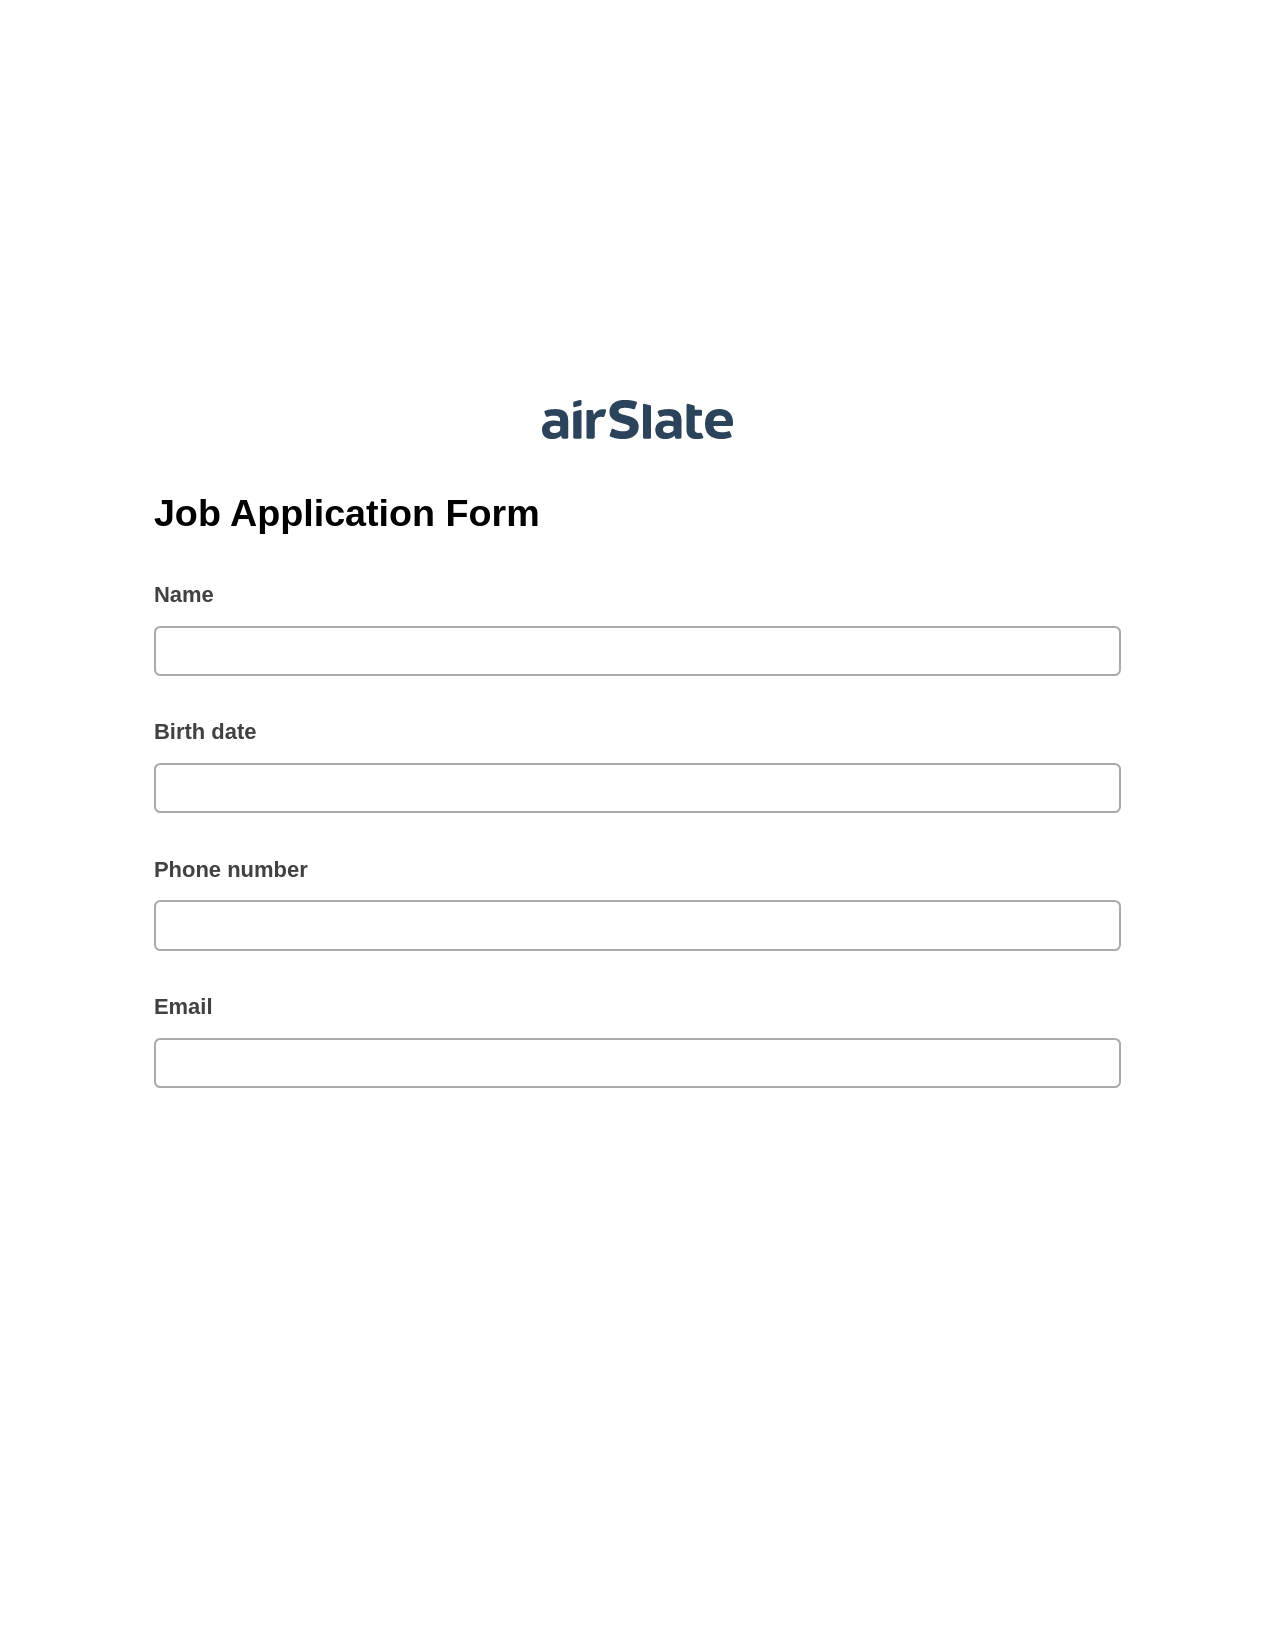 Job Application Form Pre-fill from CSV File Dropdown Options Bot, Add Tags to Slate Bot, Archive to SharePoint Folder Bot